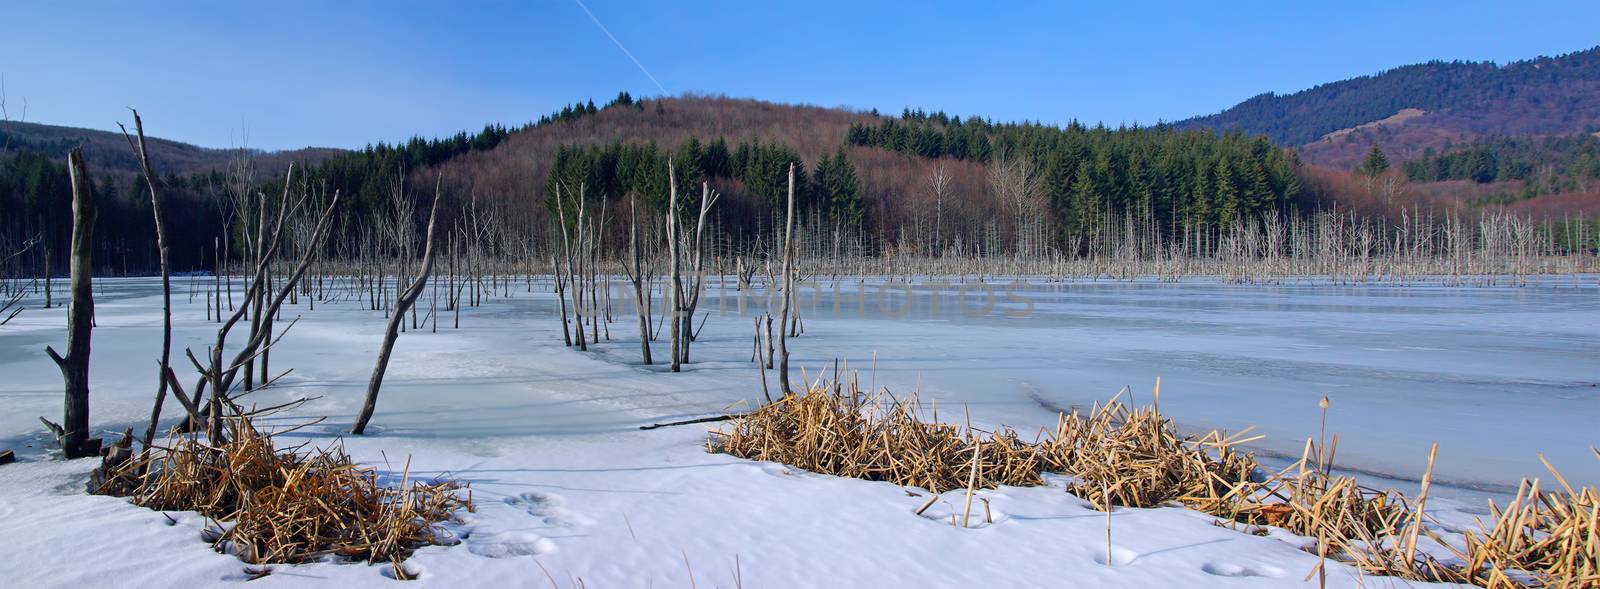 Winter forest lake panorama by savcoco